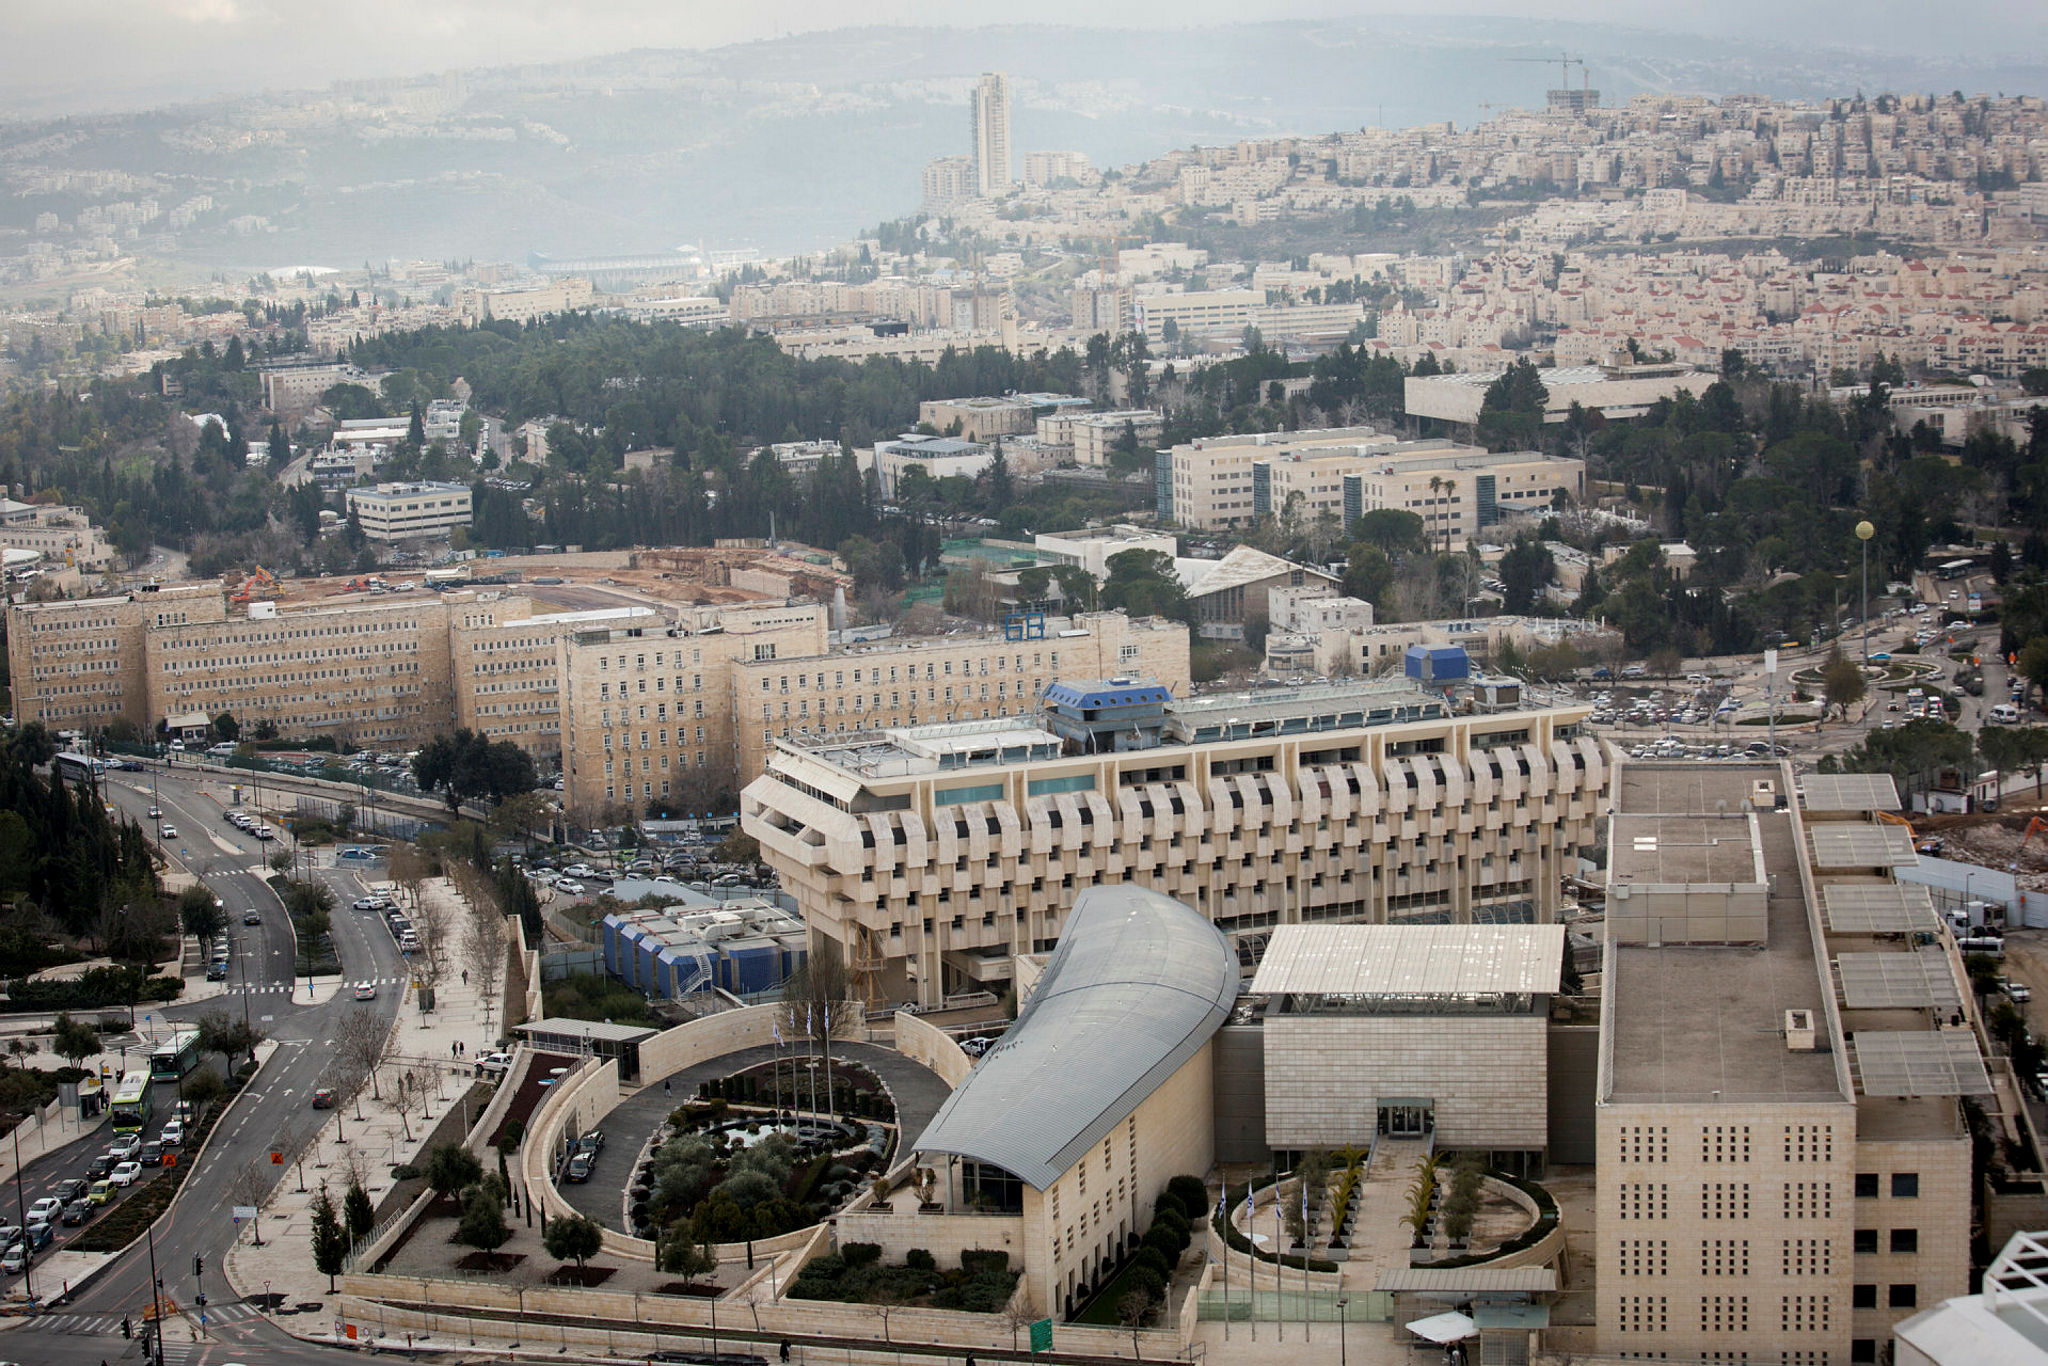 The government precinct of the State of Israel.